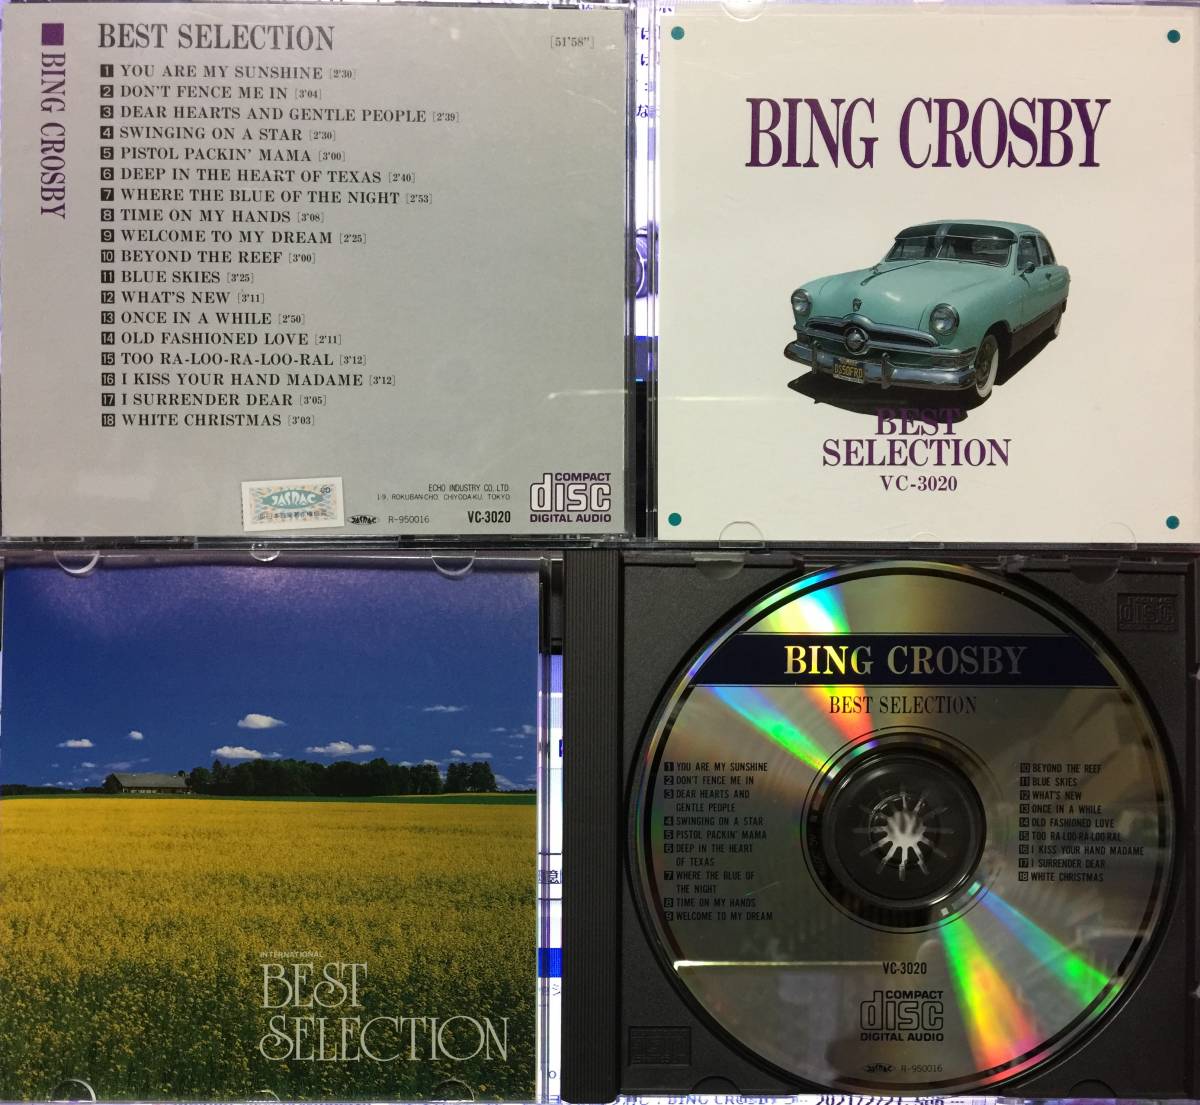 CD8枚 BING CROSBY BIG ARTIST ALBUM,WHITE CHRISTMAS,16 MOST REQUESTED SONGS,THE BEST OF ビング クロスビー_画像6